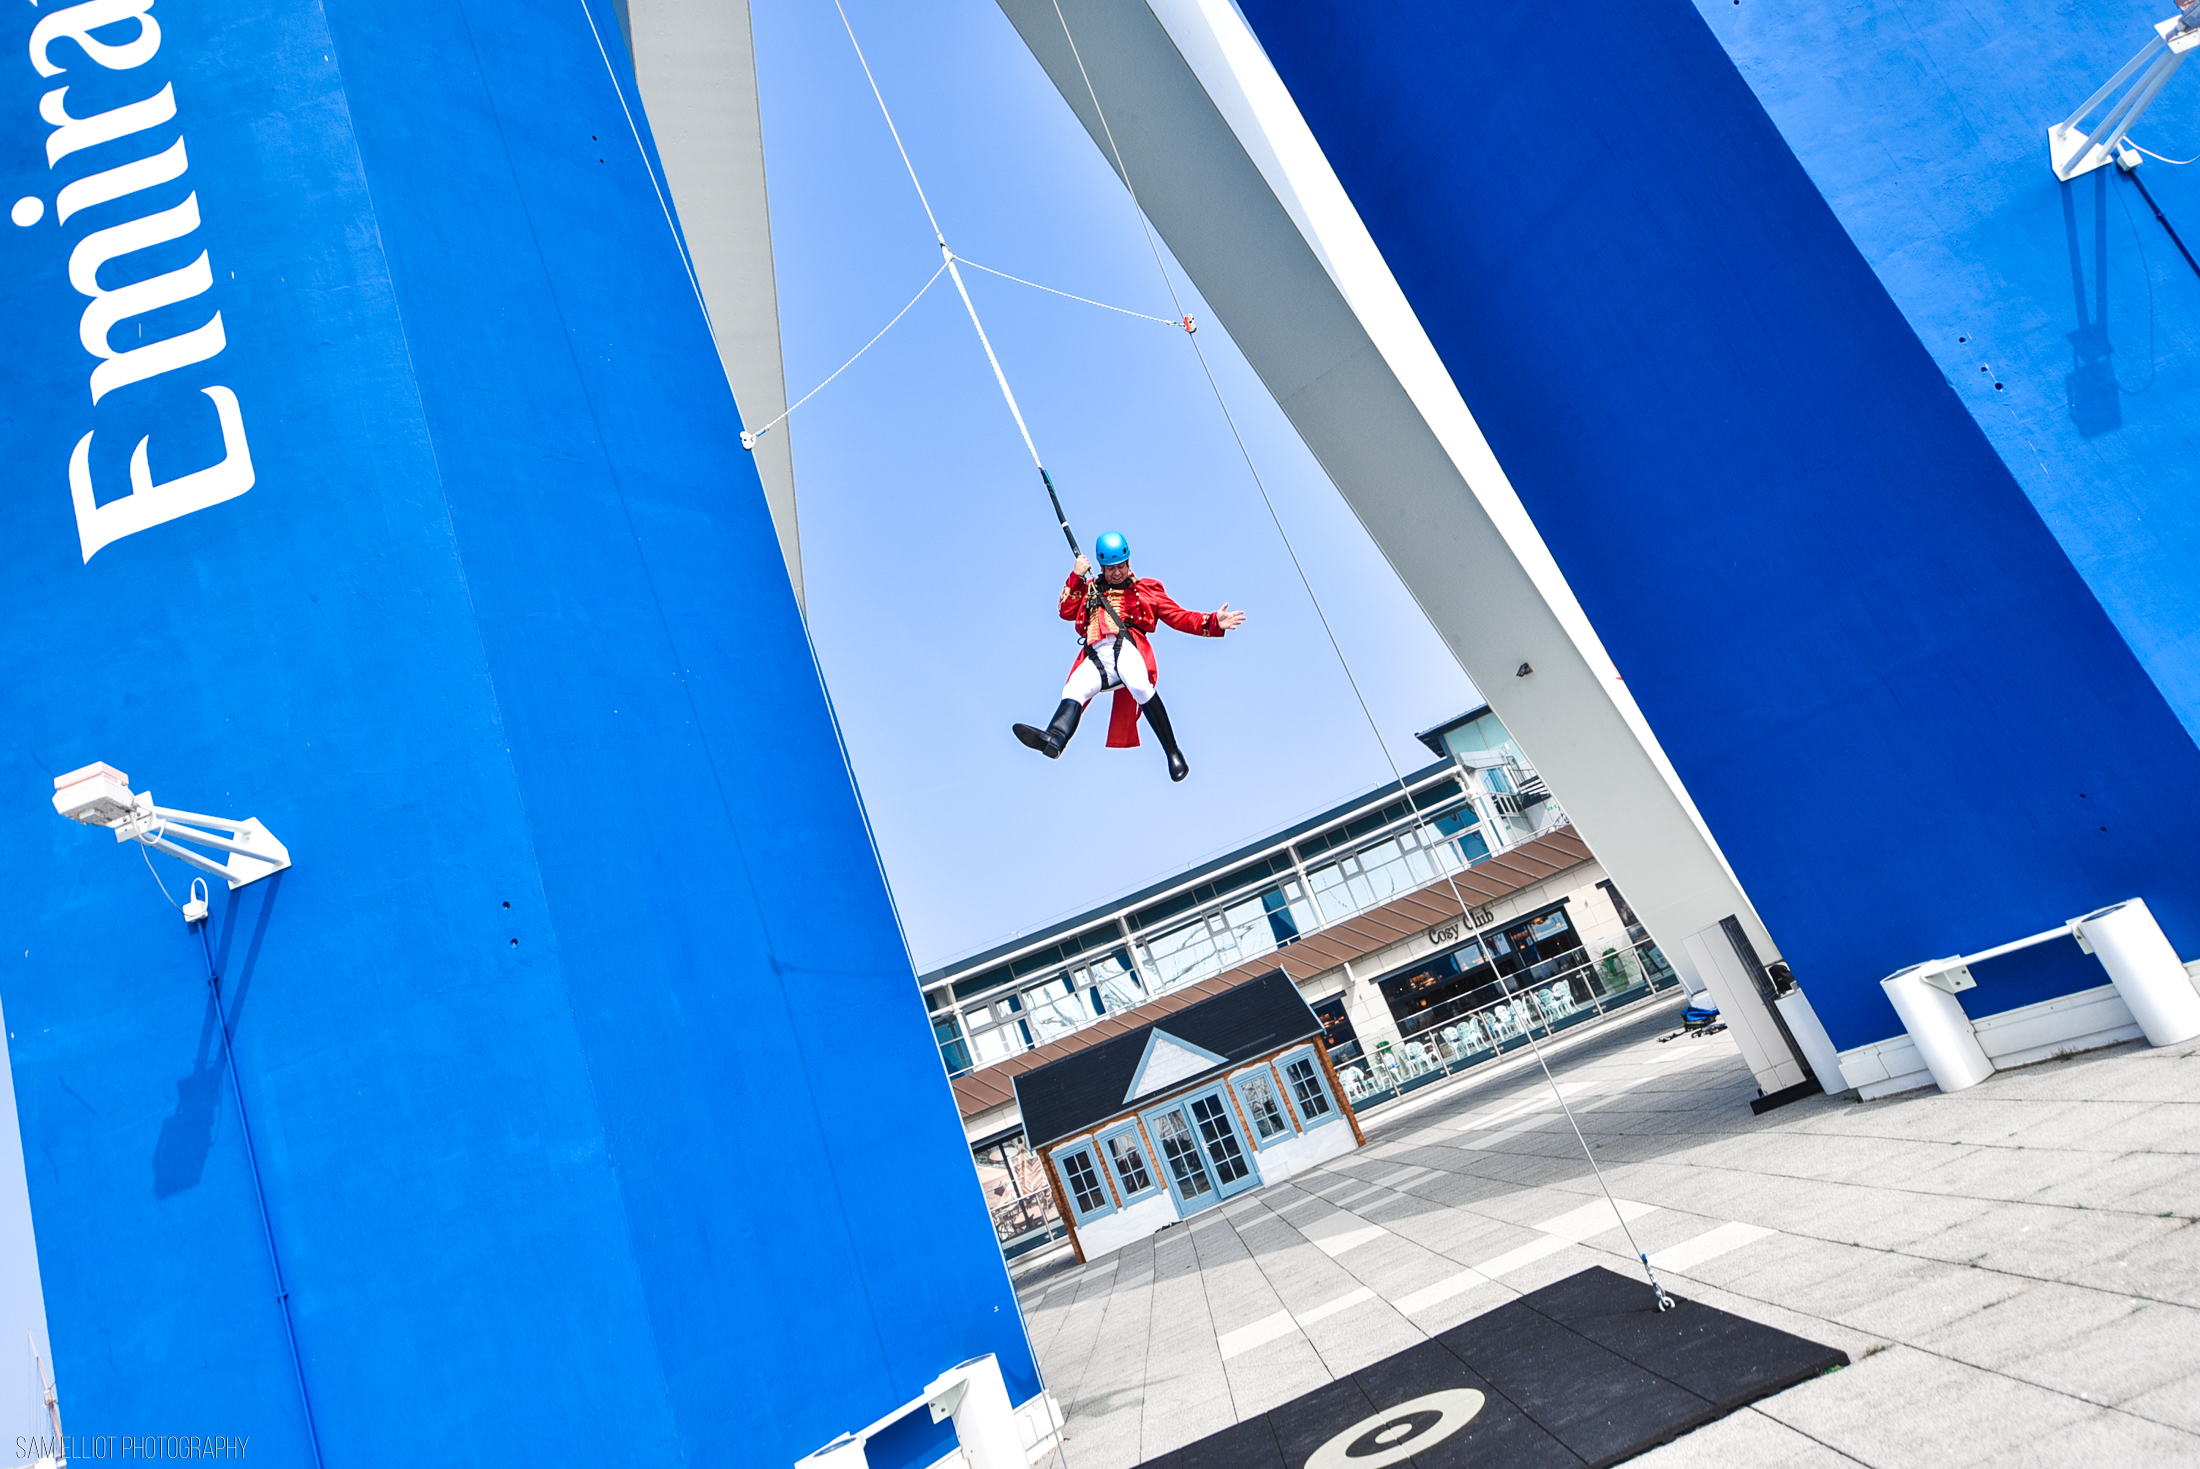 Comic Con Takes the Drop! - A cosplayer dangles mid air at Spinnaker Tower